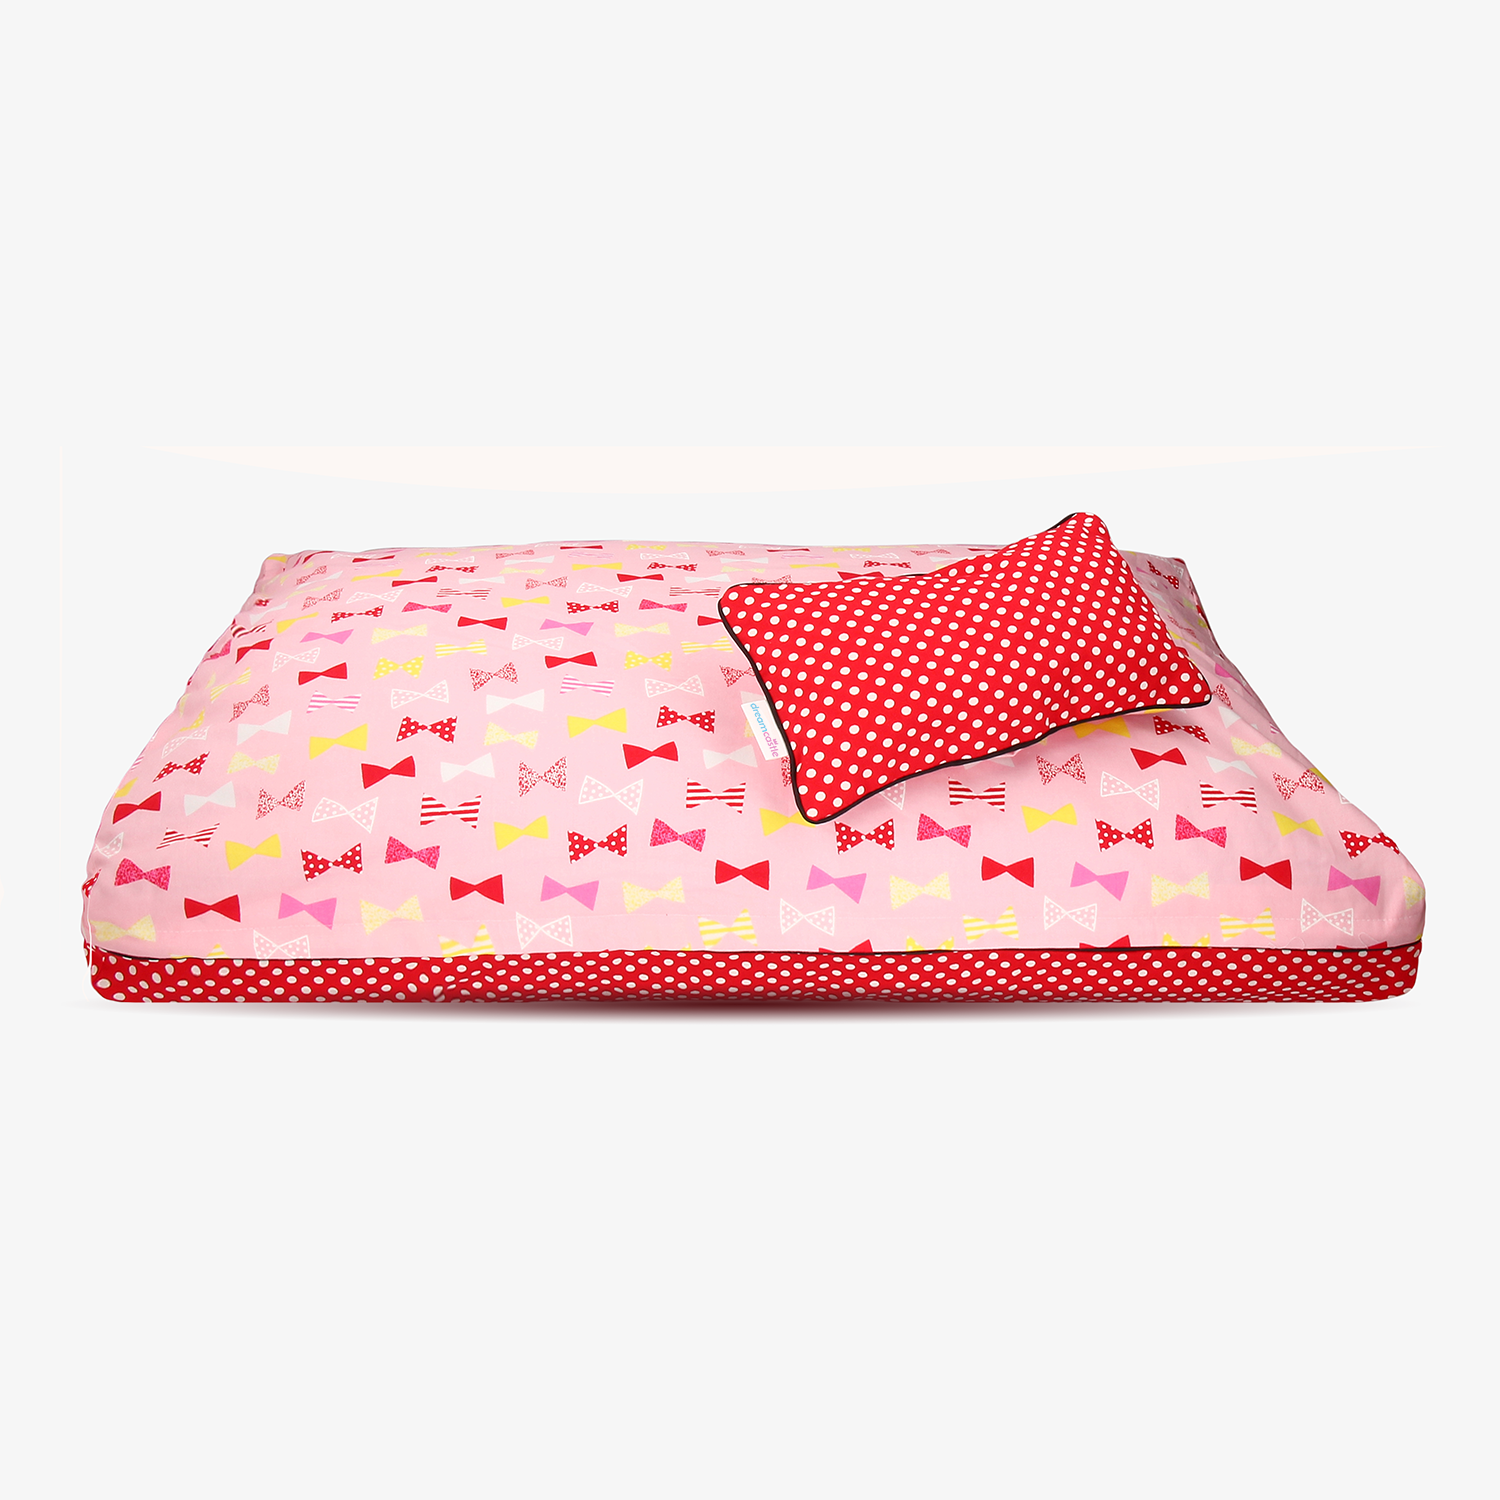 Red Ribbon | A super cute red polkadot dog bed cover from DreamCastle - Little Cherry